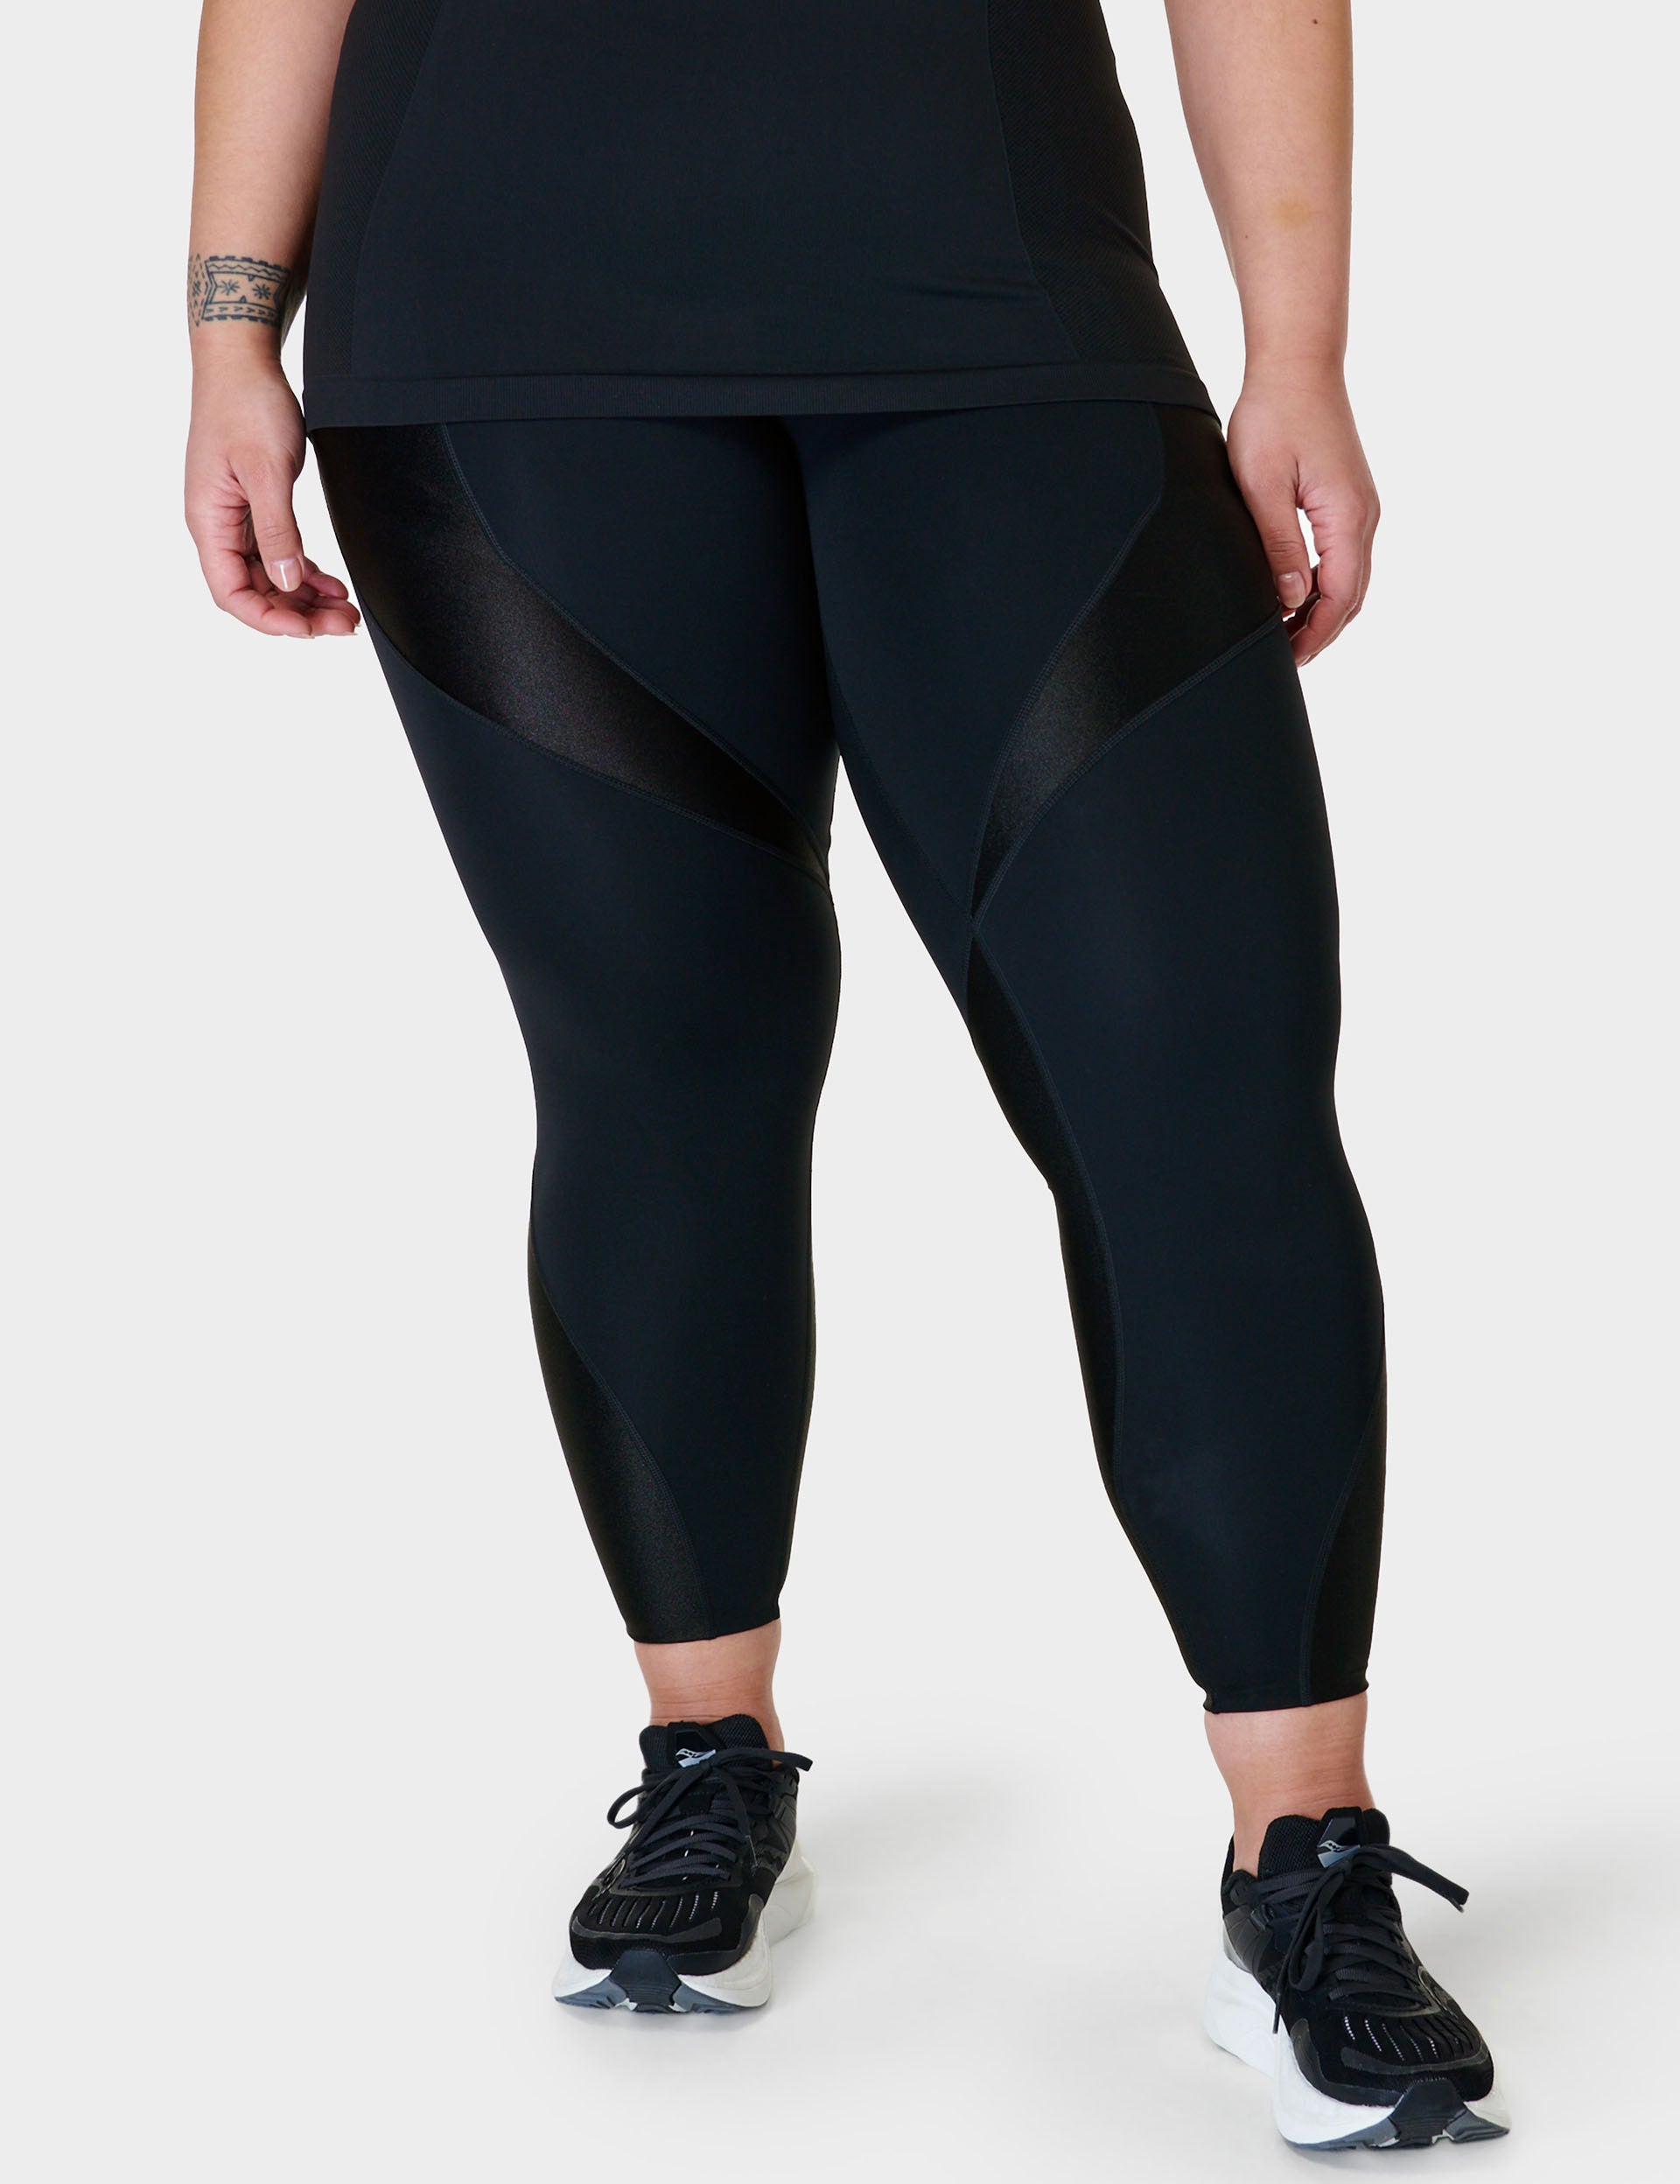 Sweaty Betty Hampstead - Look and feel powerful in the new limited addition  Power Leggings!